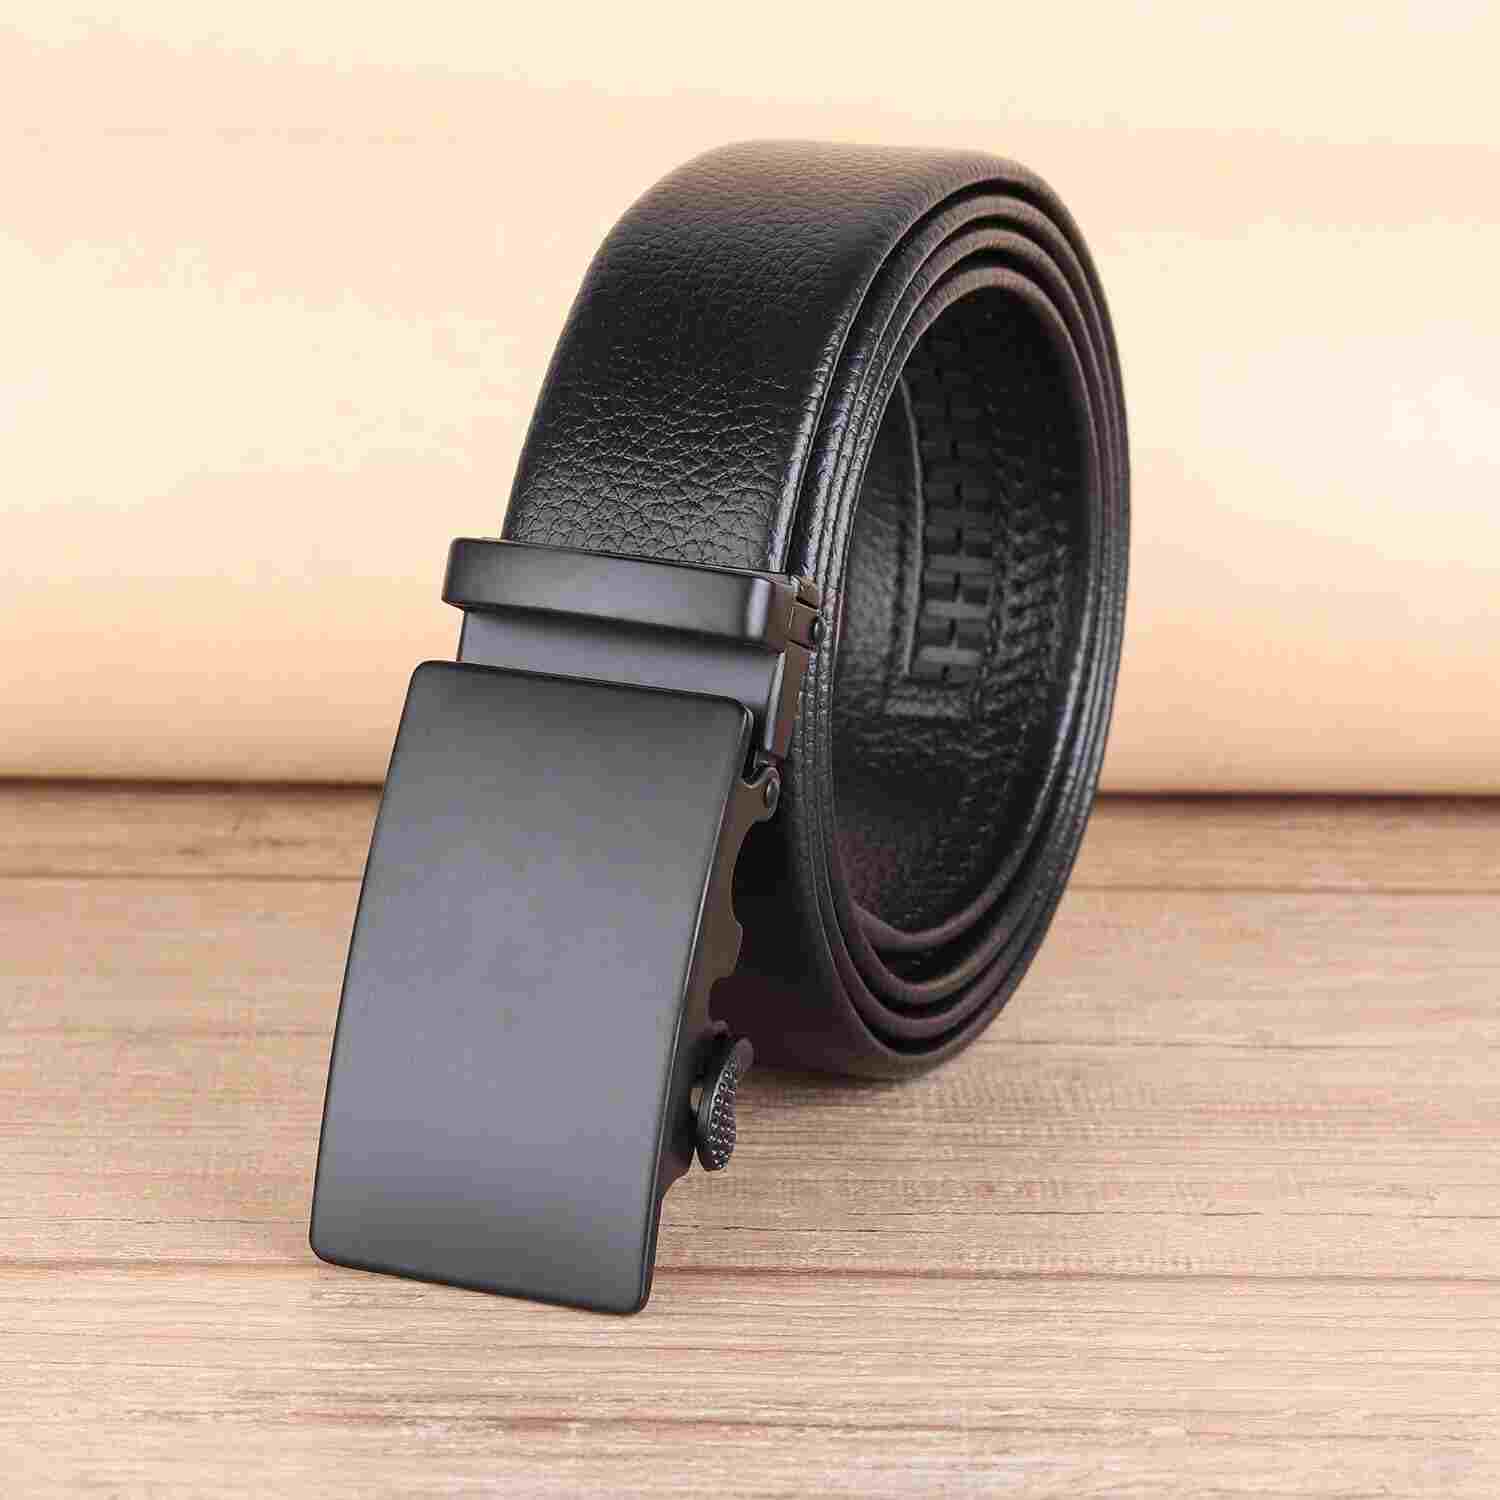 Leather Belt for Men, Formal/Casual,Autolock,Black | Fit on up to 40 Inches Waist size